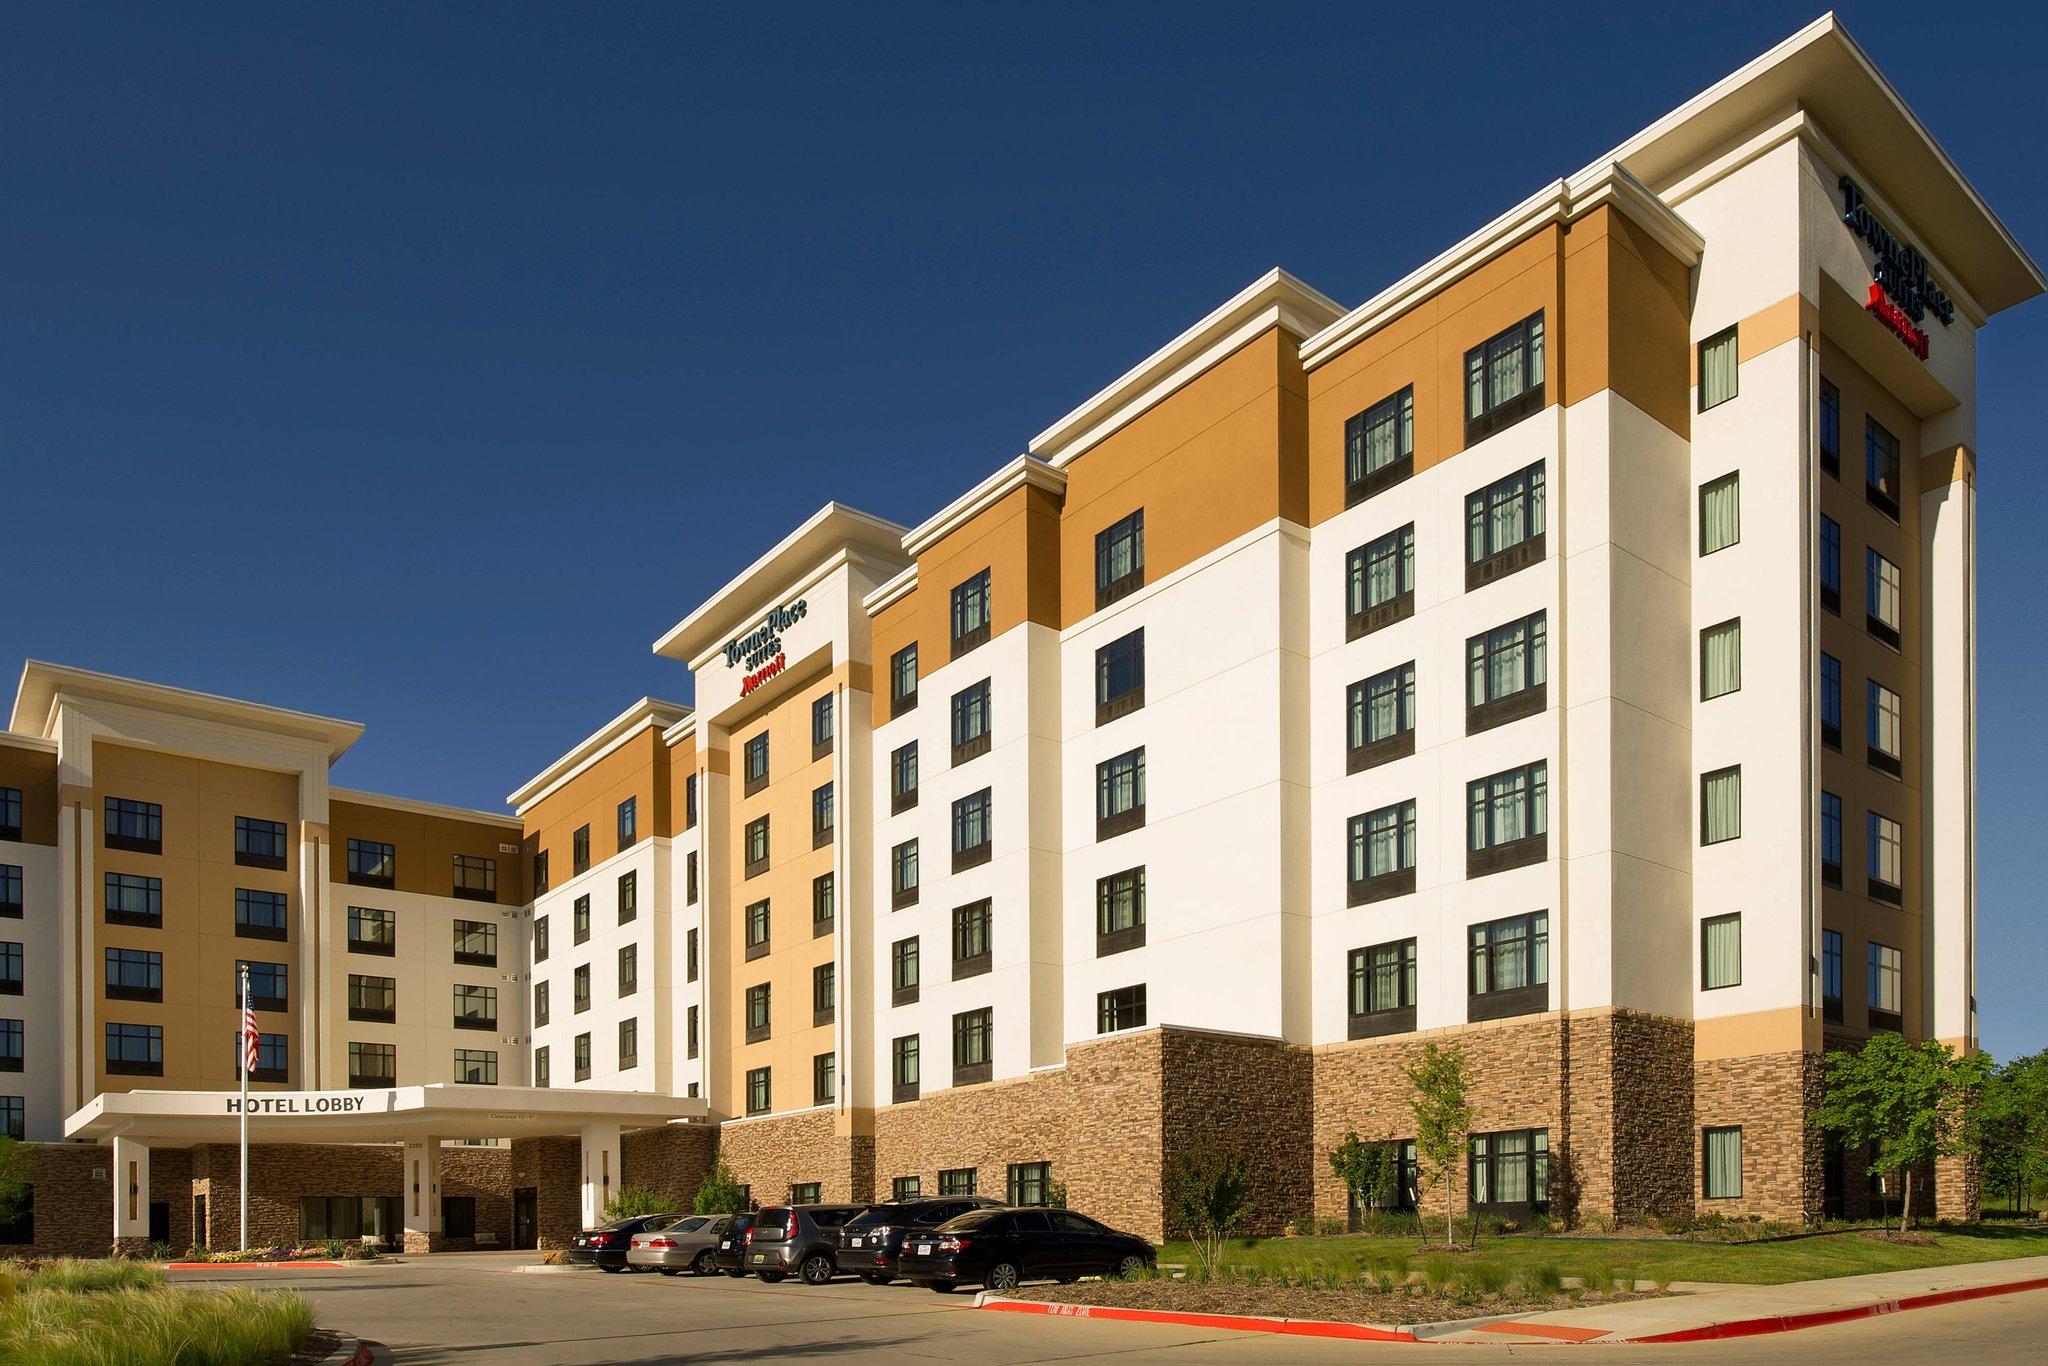 TownePlace Suites Dallas DFW Airport North/Grapevine in Grapevine, TX